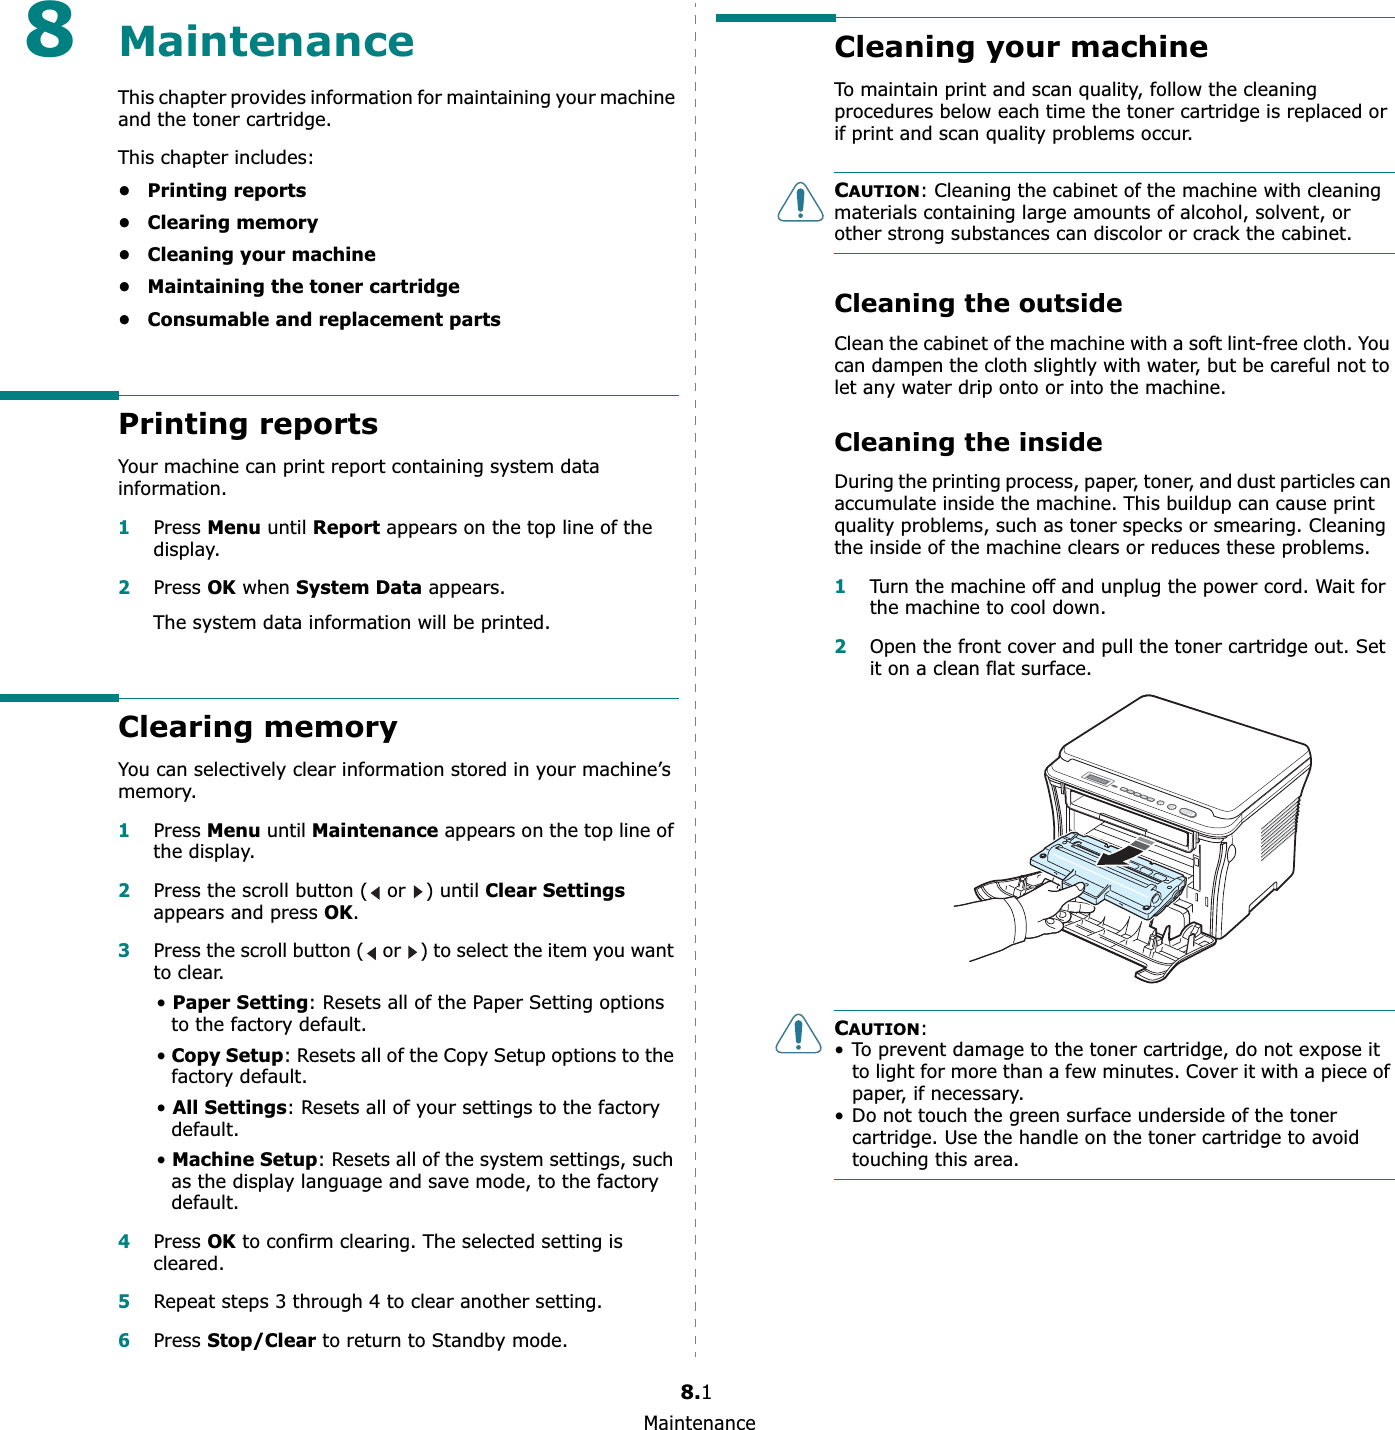 Maintenance8.18MaintenanceThis chapter provides information for maintaining your machine and the toner cartridge.This chapter includes:• Printing reports• Clearing memory• Cleaning your machine• Maintaining the toner cartridge• Consumable and replacement partsPrinting reportsYour machine can print report containing system data information.1Press Menu until Report appears on the top line of the display.2Press OK when System Data appears.The system data information will be printed.Clearing memoryYou can selectively clear information stored in your machine’s memory.1Press Menu until Maintenance appears on the top line of the display. 2Press the scroll button (  or  ) until Clear Settingsappears and press OK.3Press the scroll button (  or  ) to select the item you want to clear.•Paper Setting: Resets all of the Paper Setting options to the factory default.•Copy Setup: Resets all of the Copy Setup options to the factory default.•All Settings: Resets all of your settings to the factory default.•Machine Setup: Resets all of the system settings, such as the display language and save mode, to the factory default.4Press OK to confirm clearing. The selected setting is cleared.5Repeat steps 3 through 4 to clear another setting.6Press Stop/Clearto return to Standby mode.Cleaning your machineTo maintain print and scan quality, follow the cleaning procedures below each time the toner cartridge is replaced or if print and scan quality problems occur.CAUTION: Cleaning the cabinet of the machine with cleaning materials containing large amounts of alcohol, solvent, or other strong substances can discolor or crack the cabinet.Cleaning the outsideClean the cabinet of the machine with a soft lint-free cloth. You can dampen the cloth slightly with water, but be careful not to let any water drip onto or into the machine.Cleaning the insideDuring the printing process, paper, toner, and dust particles can accumulate inside the machine. This buildup can cause print quality problems, such as toner specks or smearing. Cleaning the inside of the machine clears or reduces these problems.1Turn the machine off and unplug the power cord. Wait for the machine to cool down.2Open the front cover and pull the toner cartridge out. Set it on a clean flat surface.CAUTION:• To prevent damage to the toner cartridge, do not expose it to light for more than a few minutes. Cover it with a piece of paper, if necessary. • Do not touch the green surface underside of the toner cartridge. Use the handle on the toner cartridge to avoid touching this area.